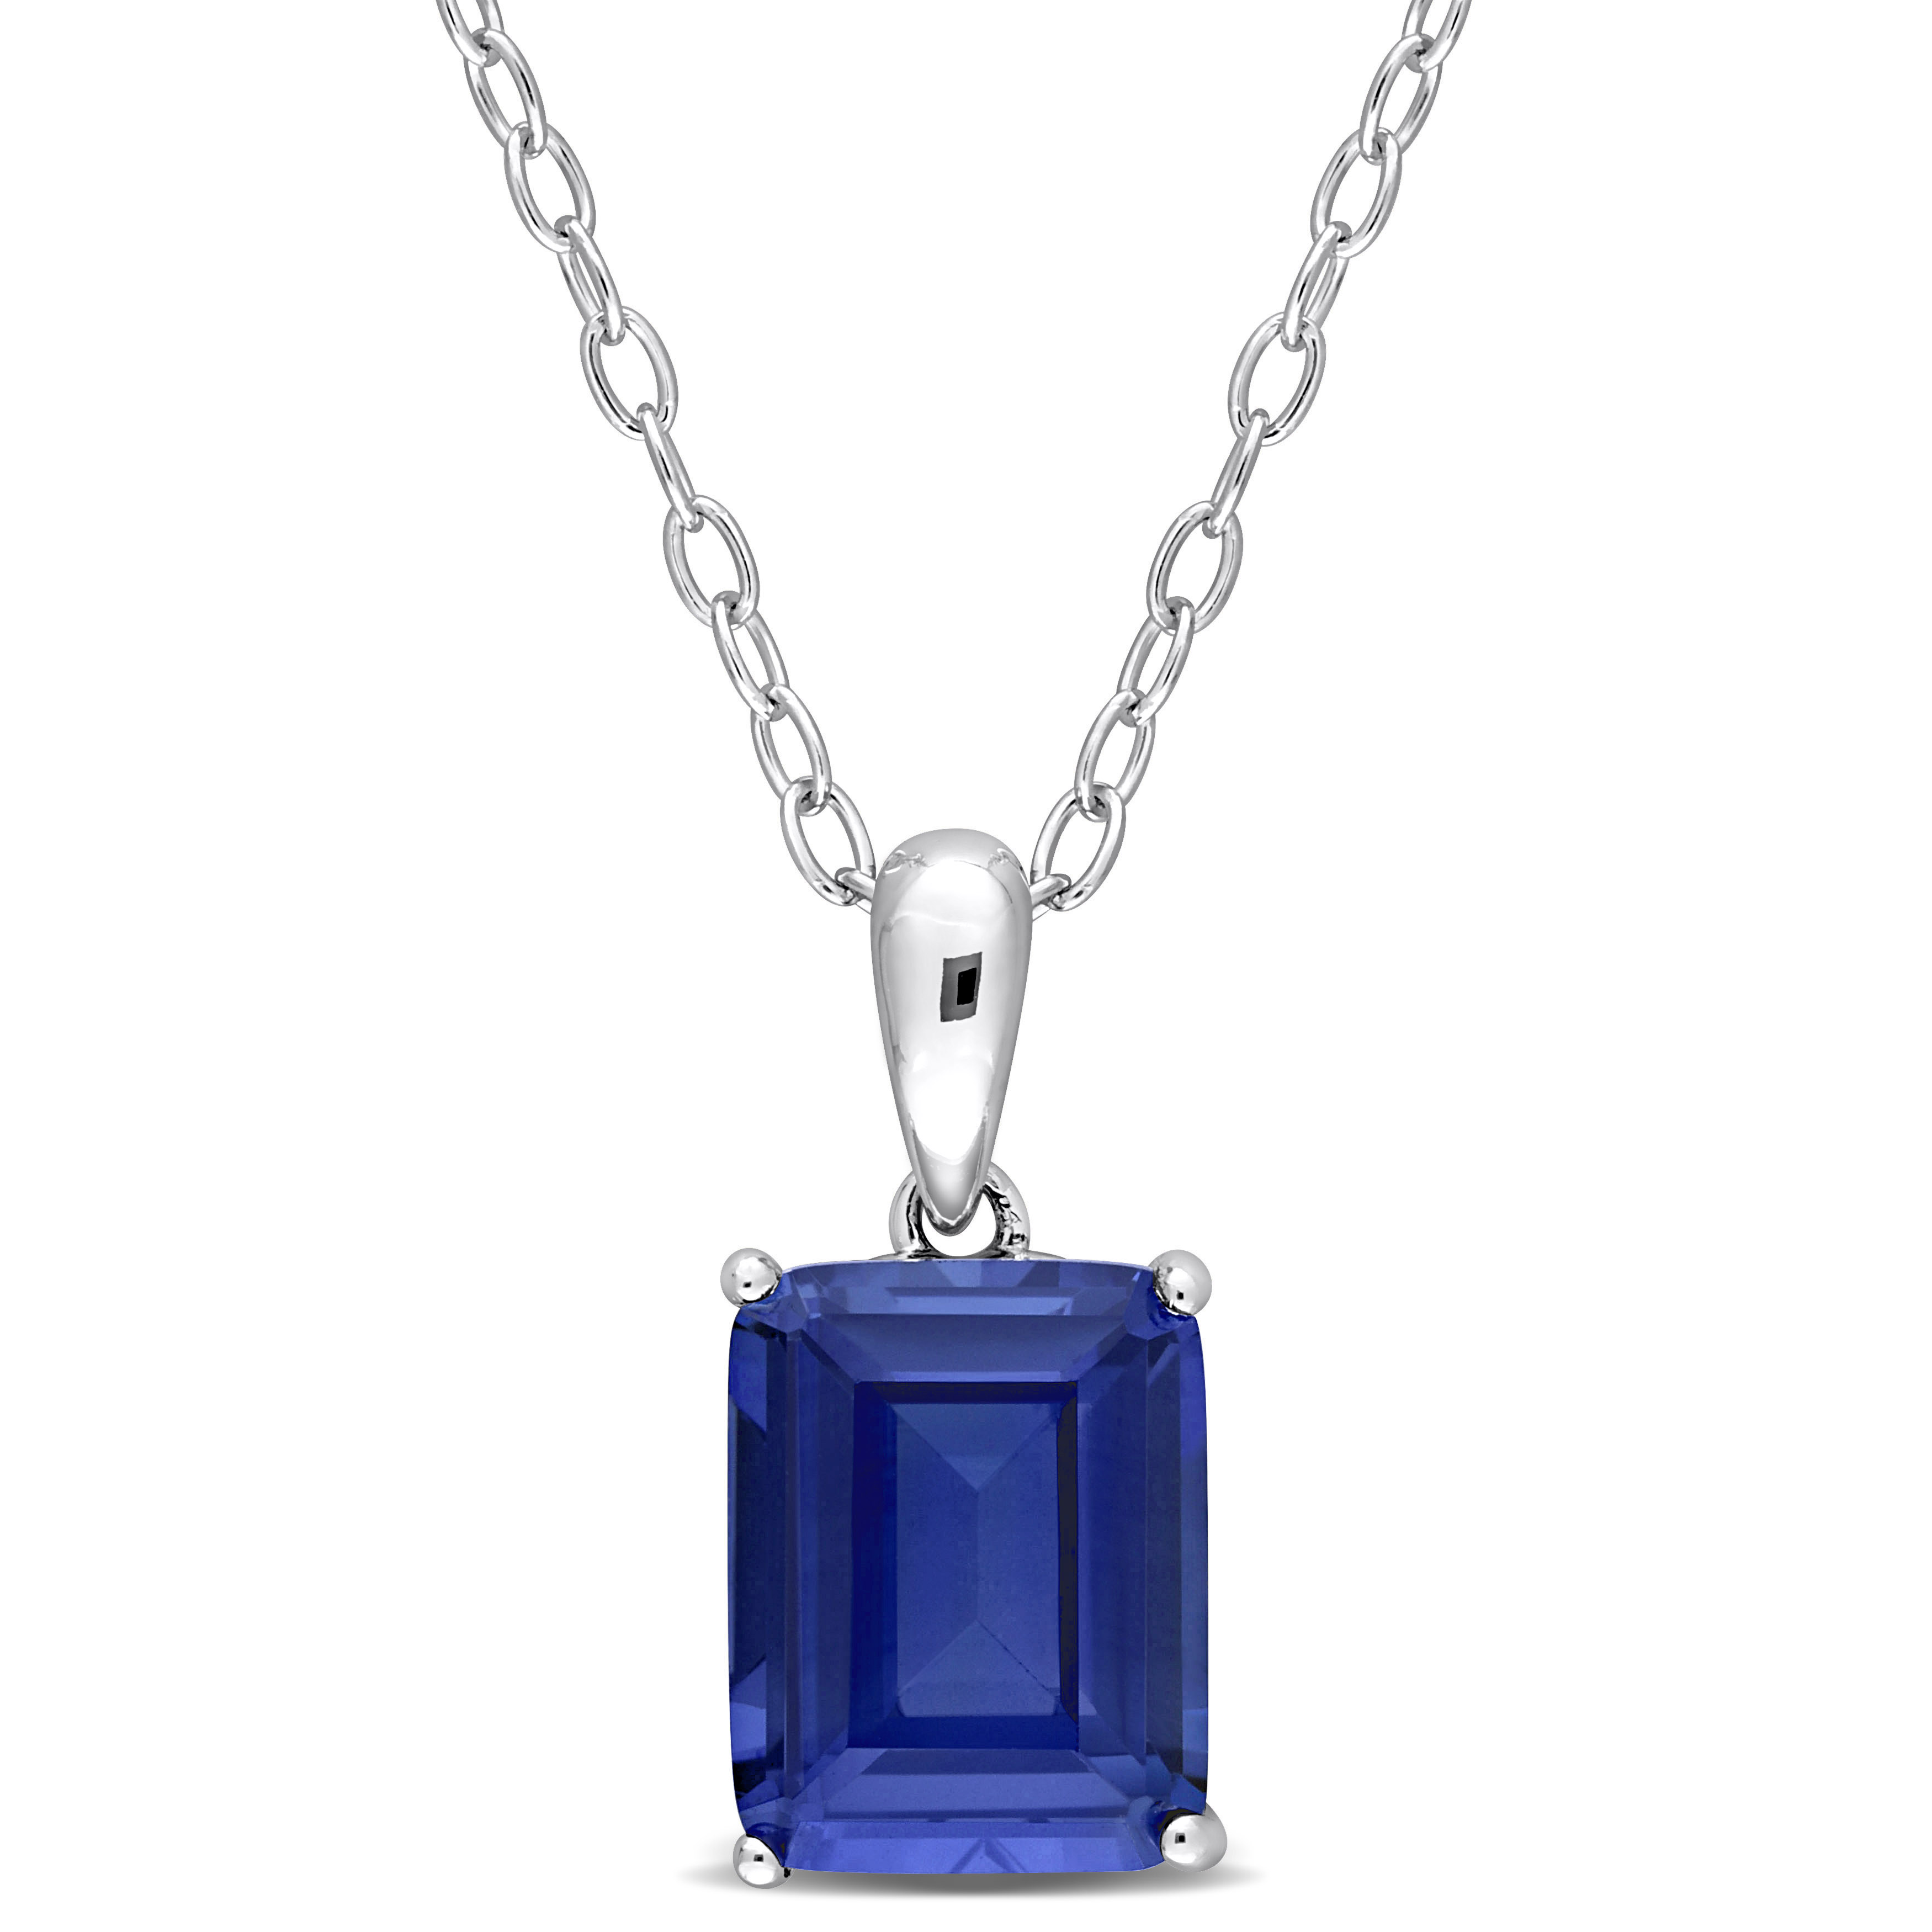 3 3/4 CT TGW Emerald Cut Created Blue Sapphire Solitaire Heart Design Pendant with Chain in Sterling Silver - 18 in.